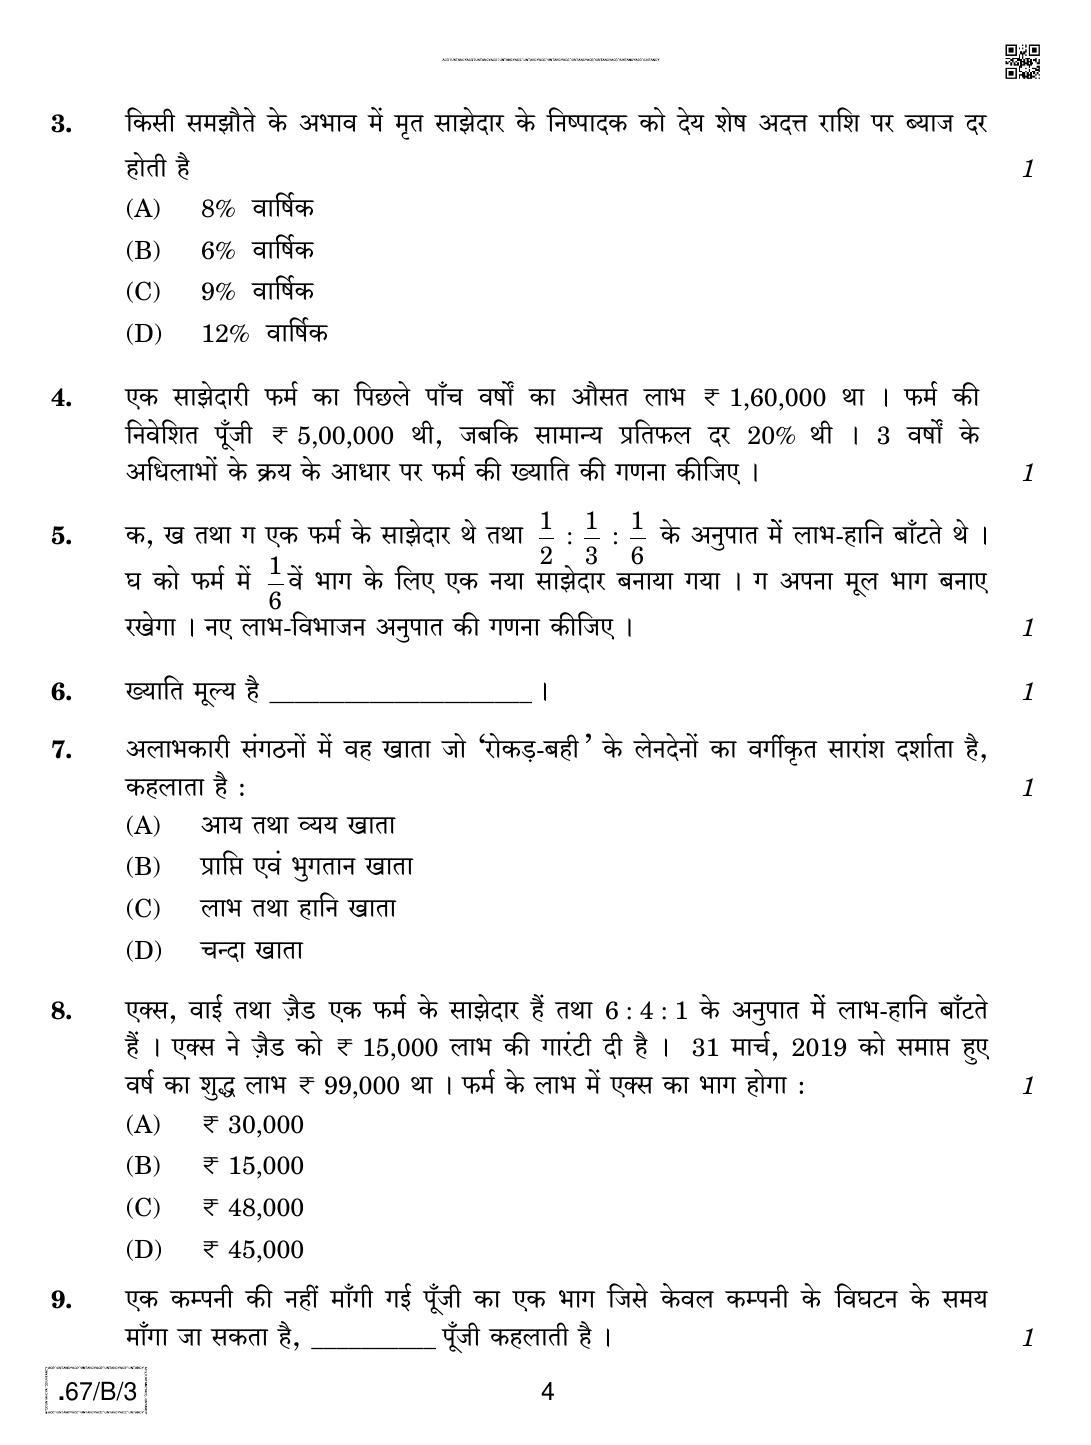 CBSE Class 12 67-C-3 - Accountancy 2020 Compartment Question Paper - Page 4